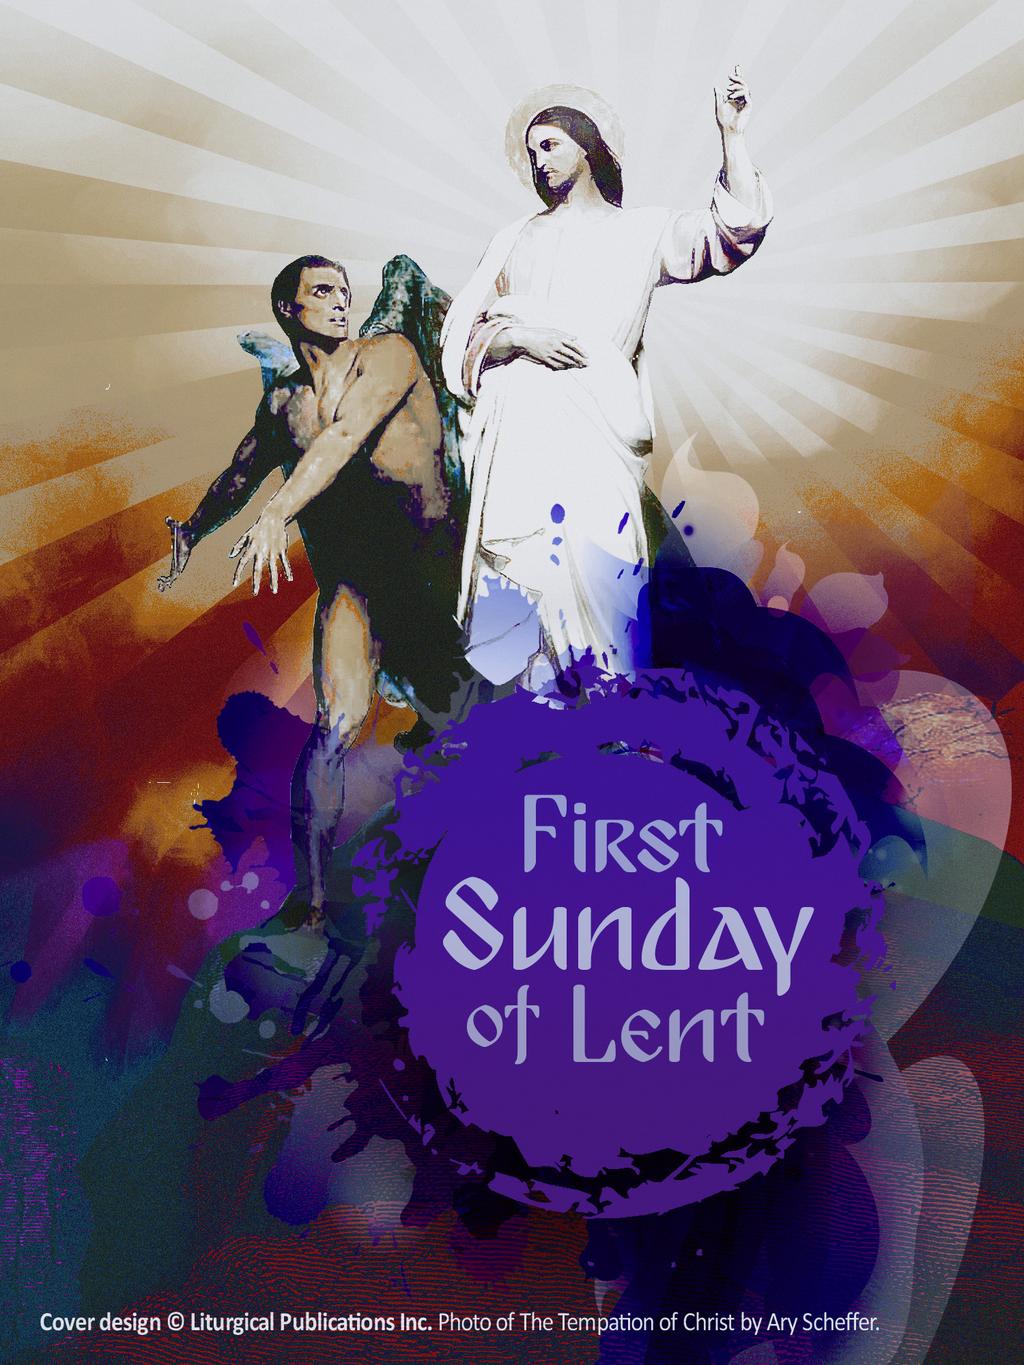 February 22, 2015 - First Sunday of Lent page 2 St. Francis of Assisi Parish Teutopolis, Illinois Parish Office February 22, 2015 203 E. Main St., P.O. Box 730, Teutopolis, IL 62467-0730 Office Hours: Mon.